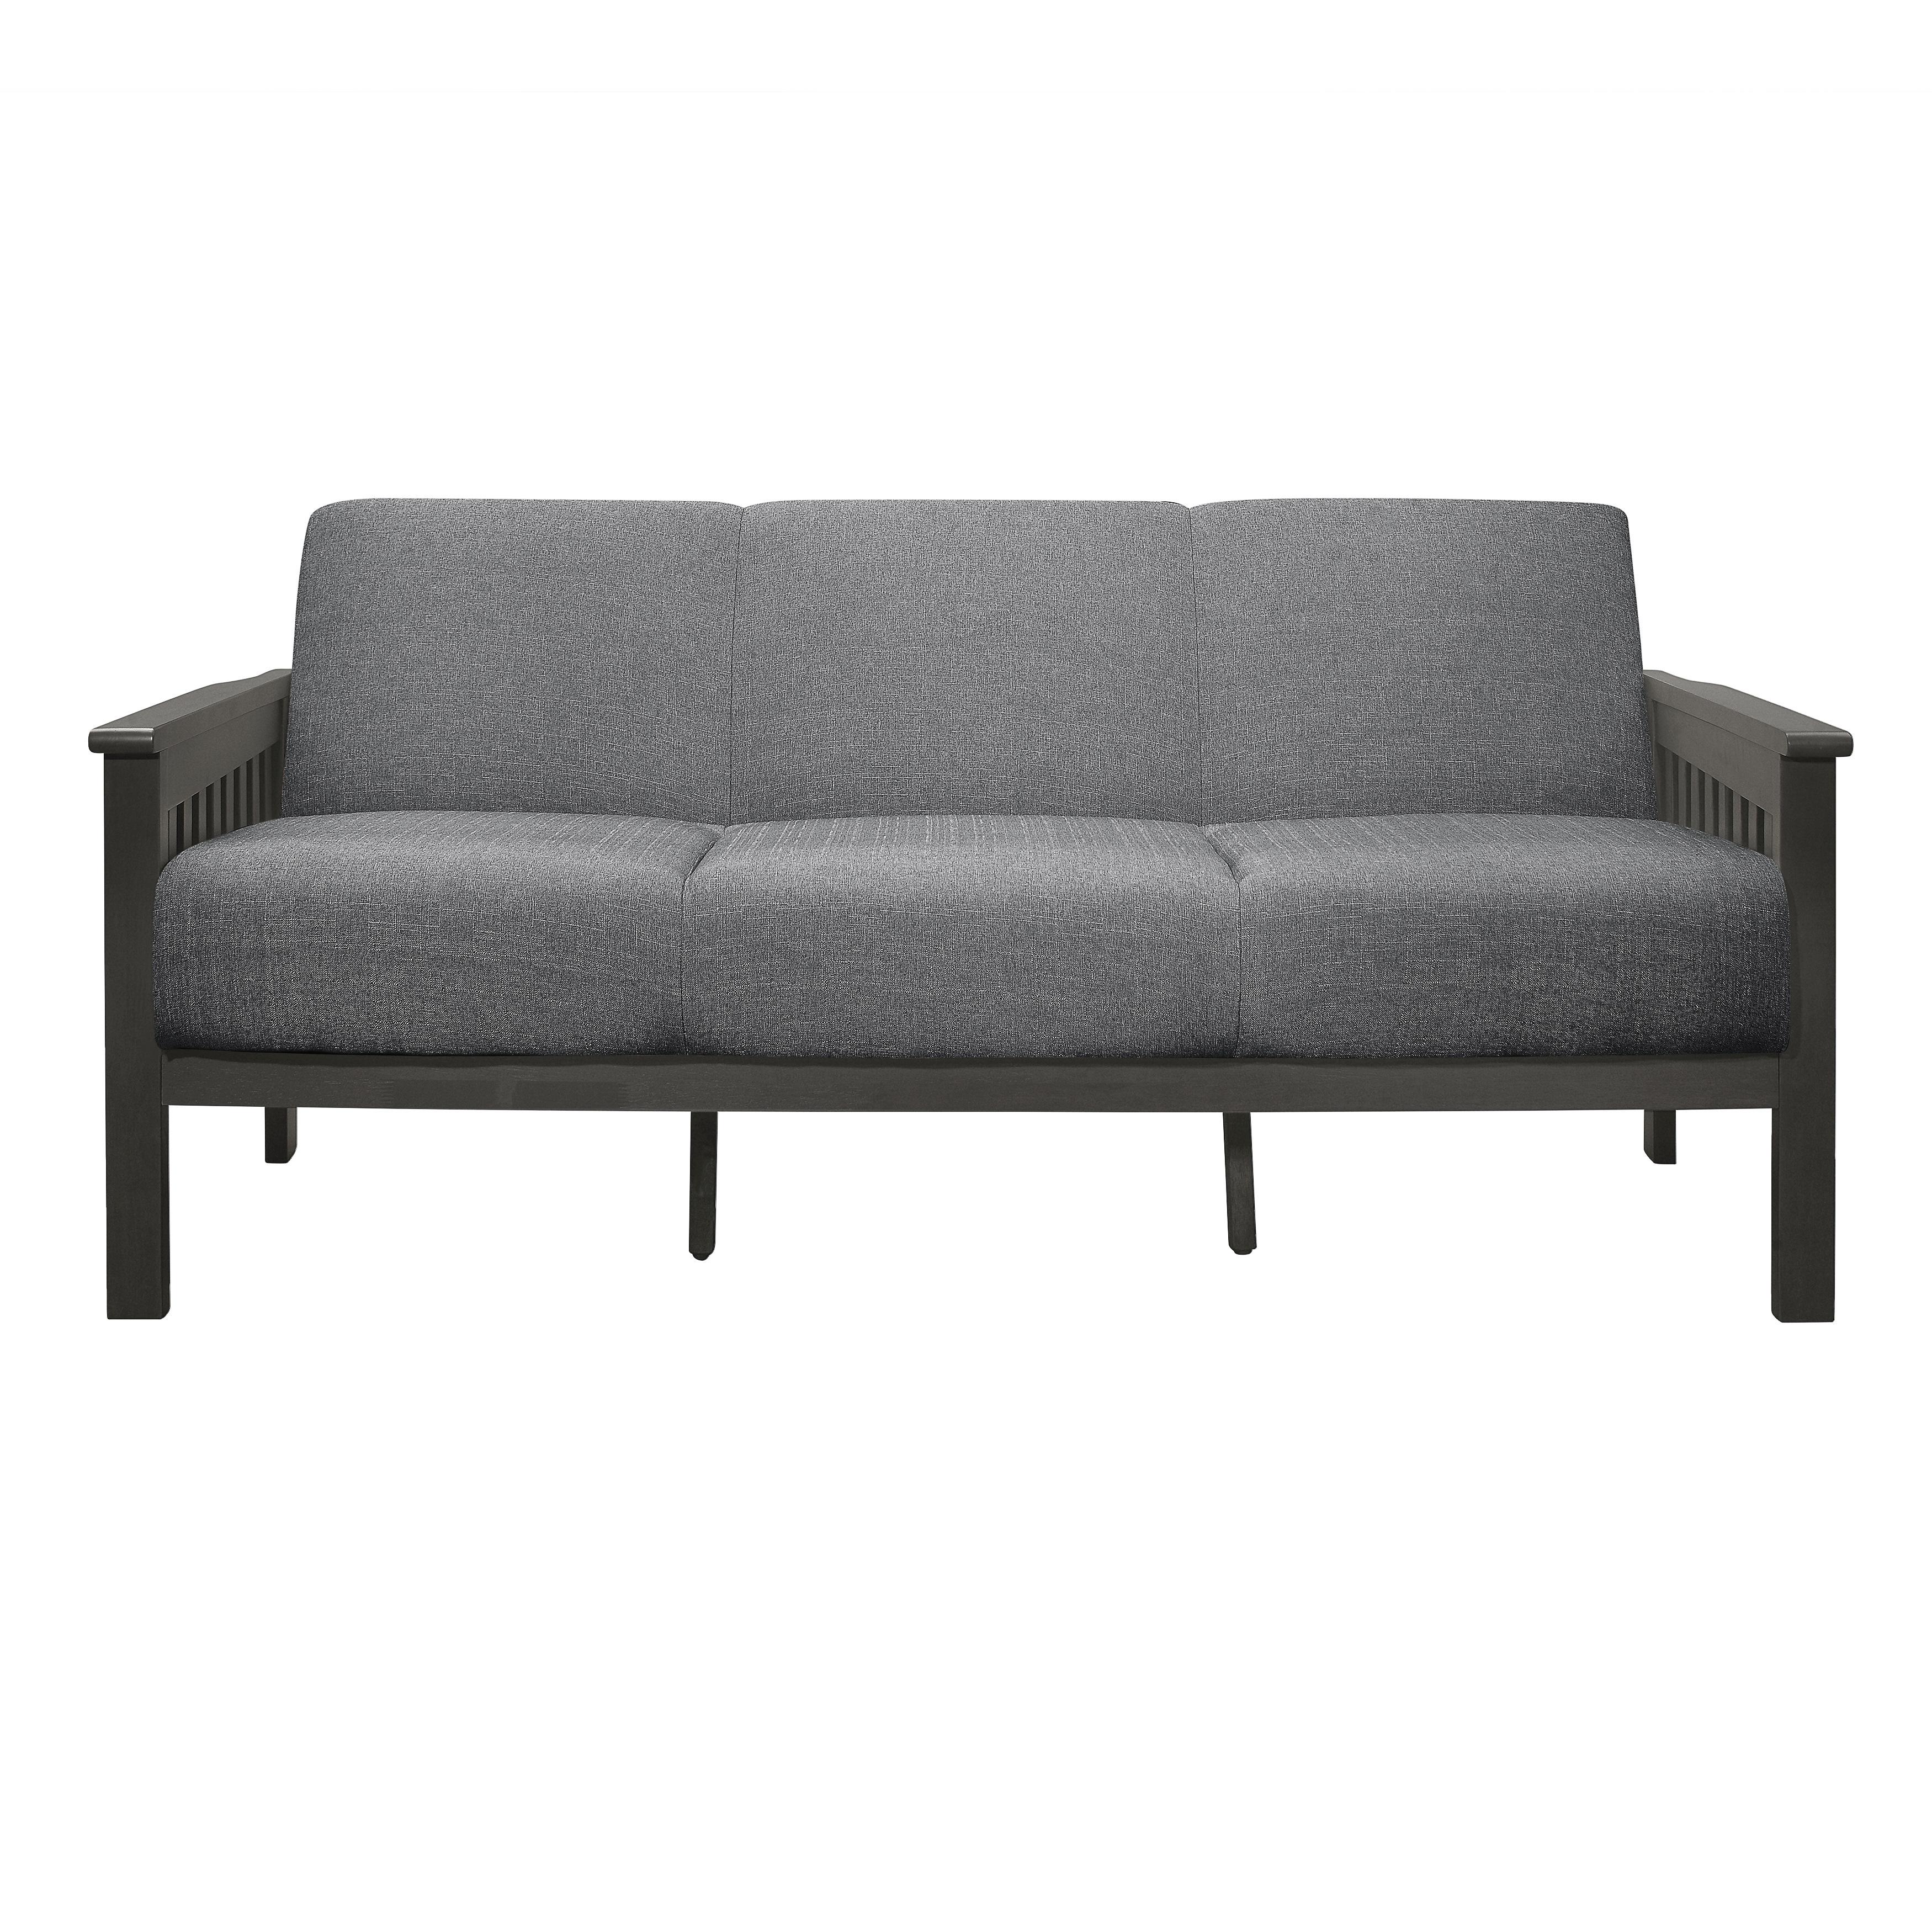 Classic Sofa 1104GY-3 Lewiston 1104GY-3 in Gray 